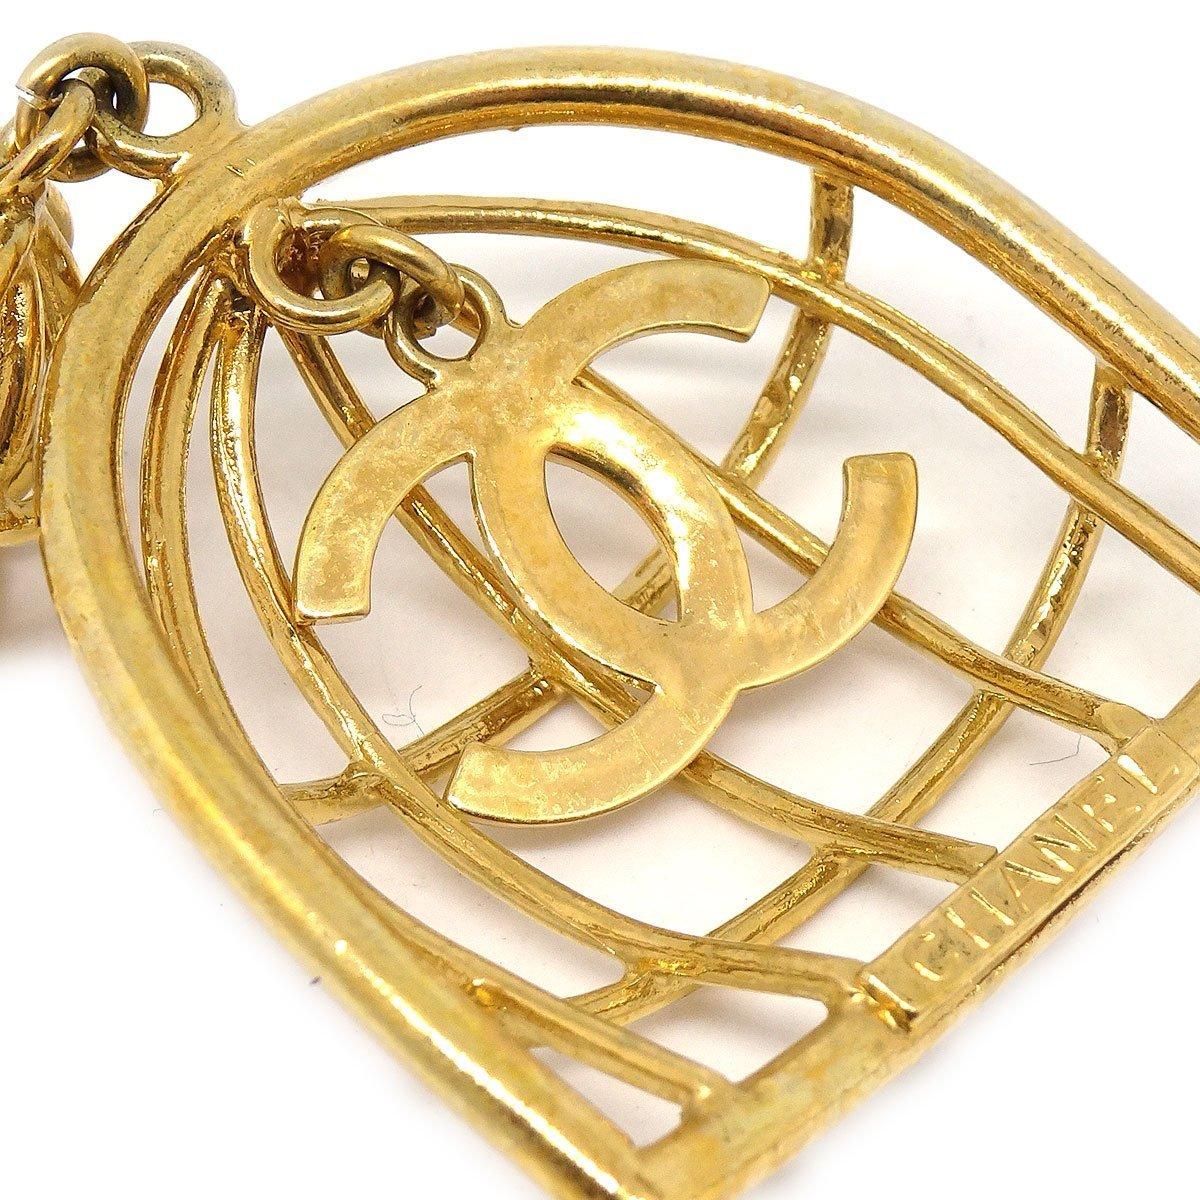 Pre-Owned Vintage Condition
From 1990's Collection
Metal
24K Gold Tone
Clip On
Width 1.5